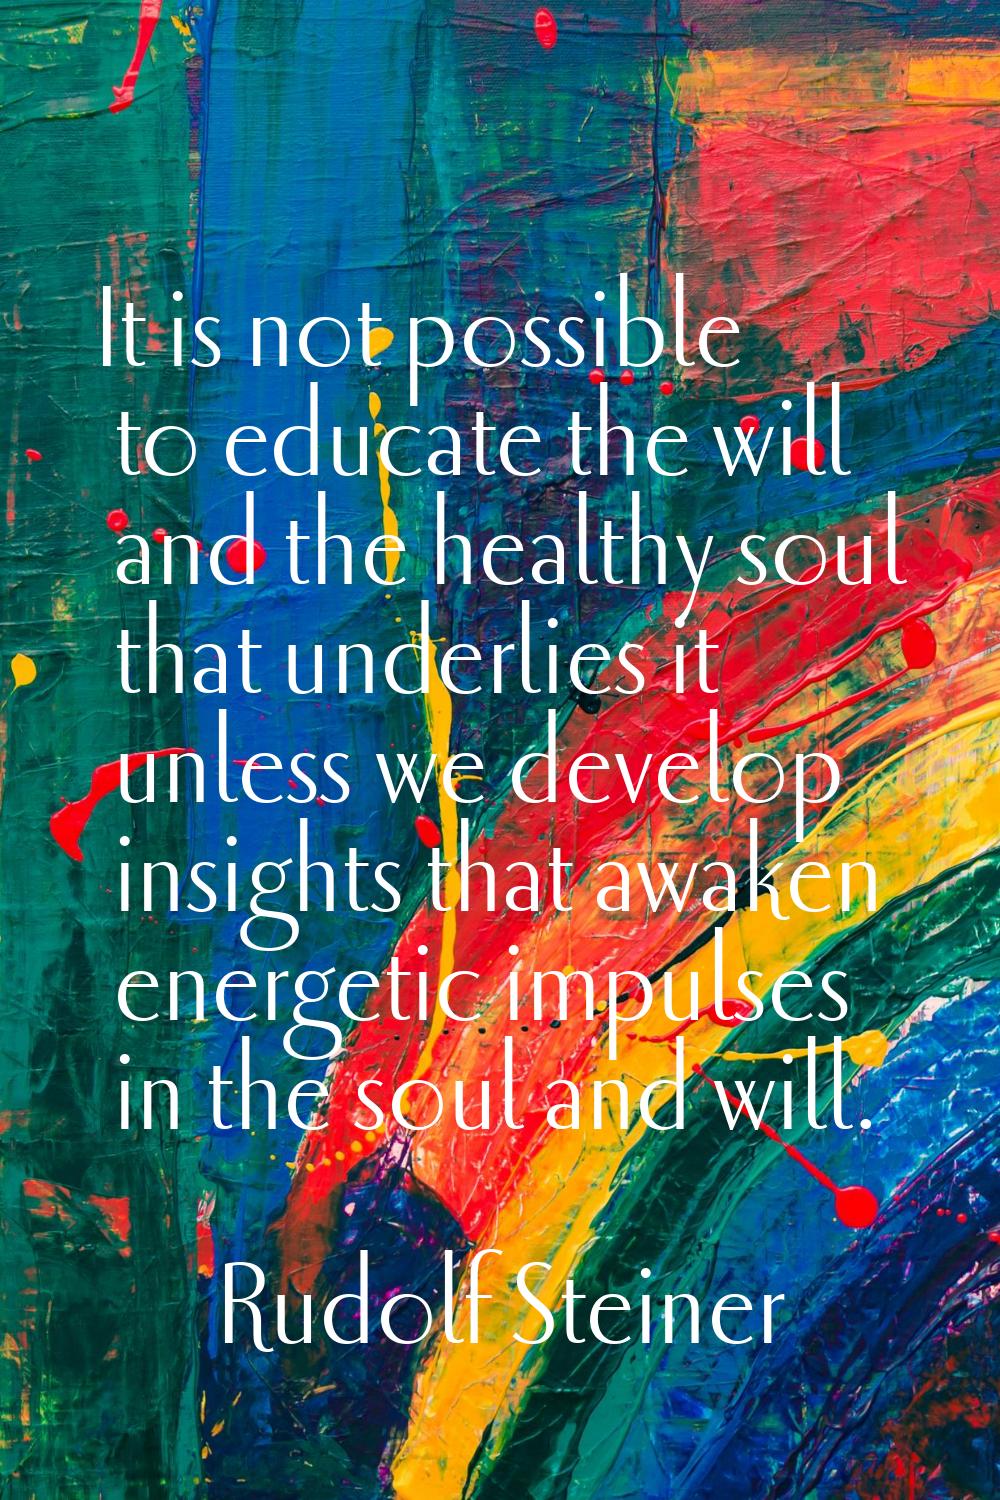 It is not possible to educate the will and the healthy soul that underlies it unless we develop ins